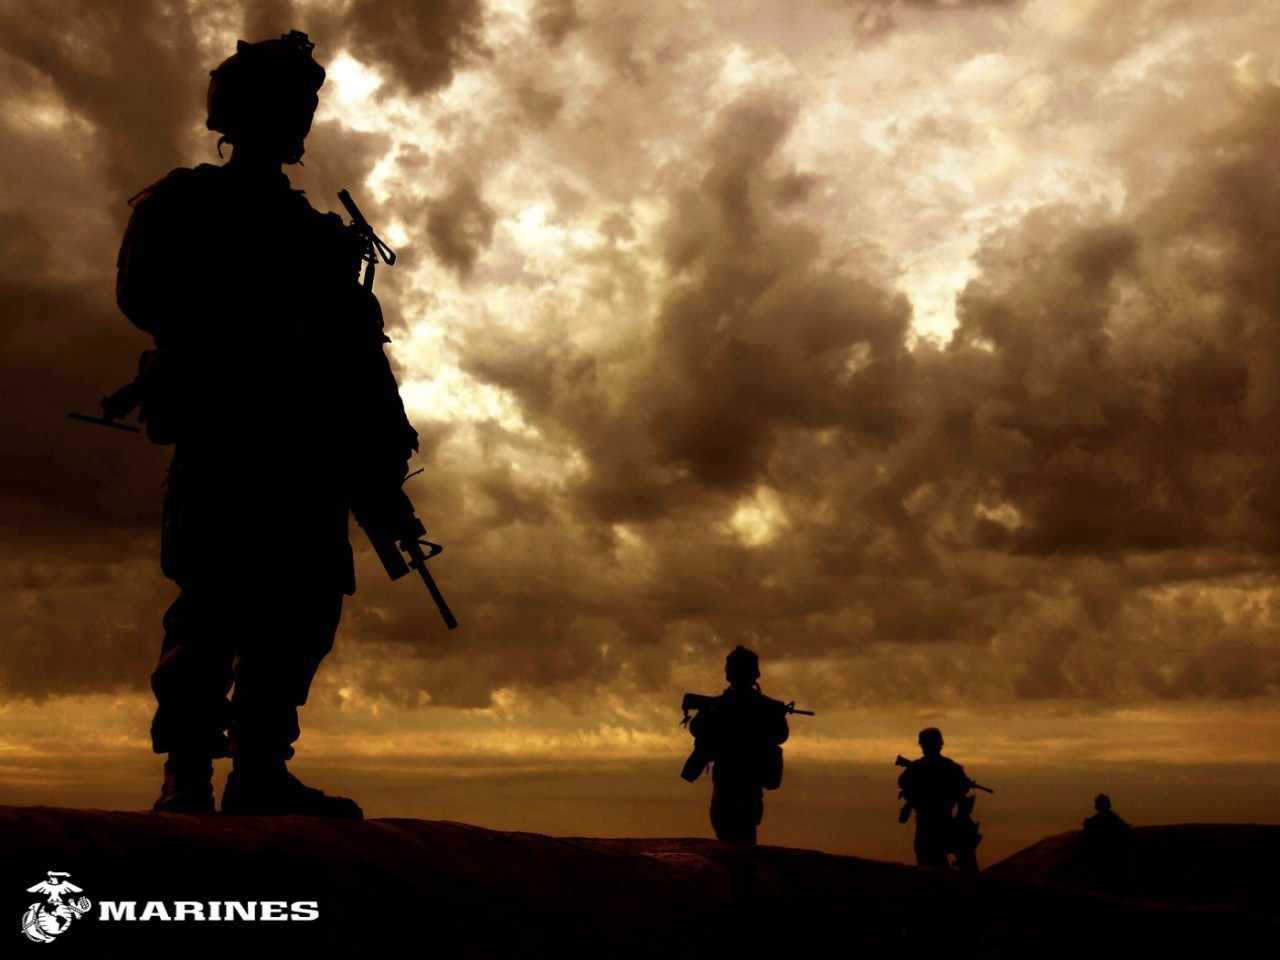 Military Image Us Army HD Wallpaper And Background Photos